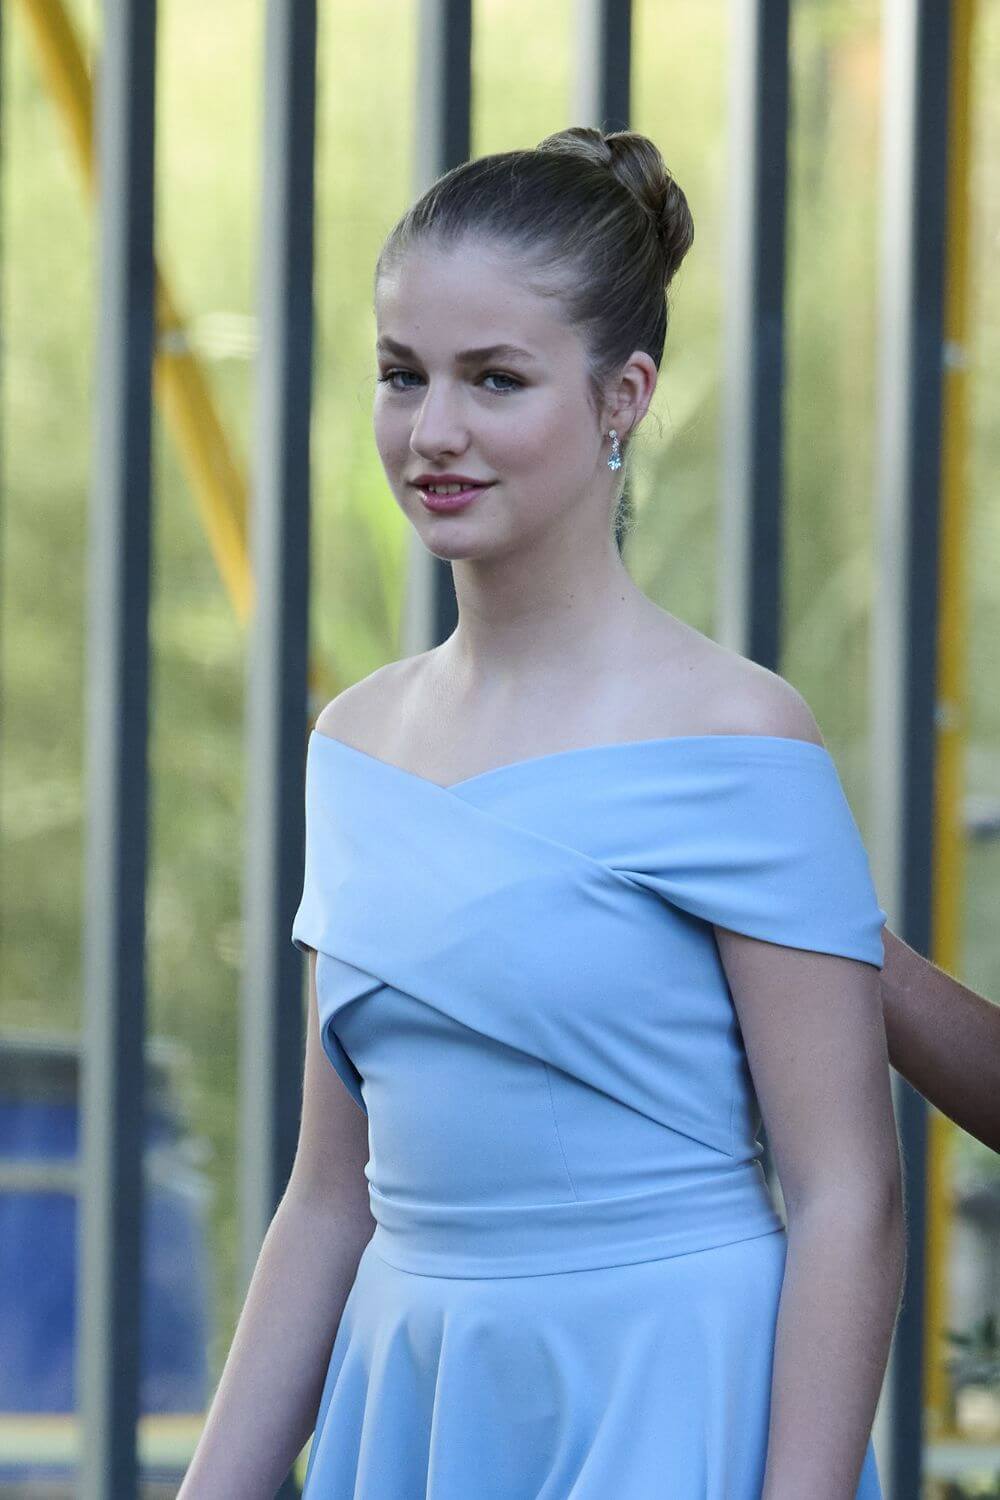 Princess Leonor wearing a royal blue evening gown